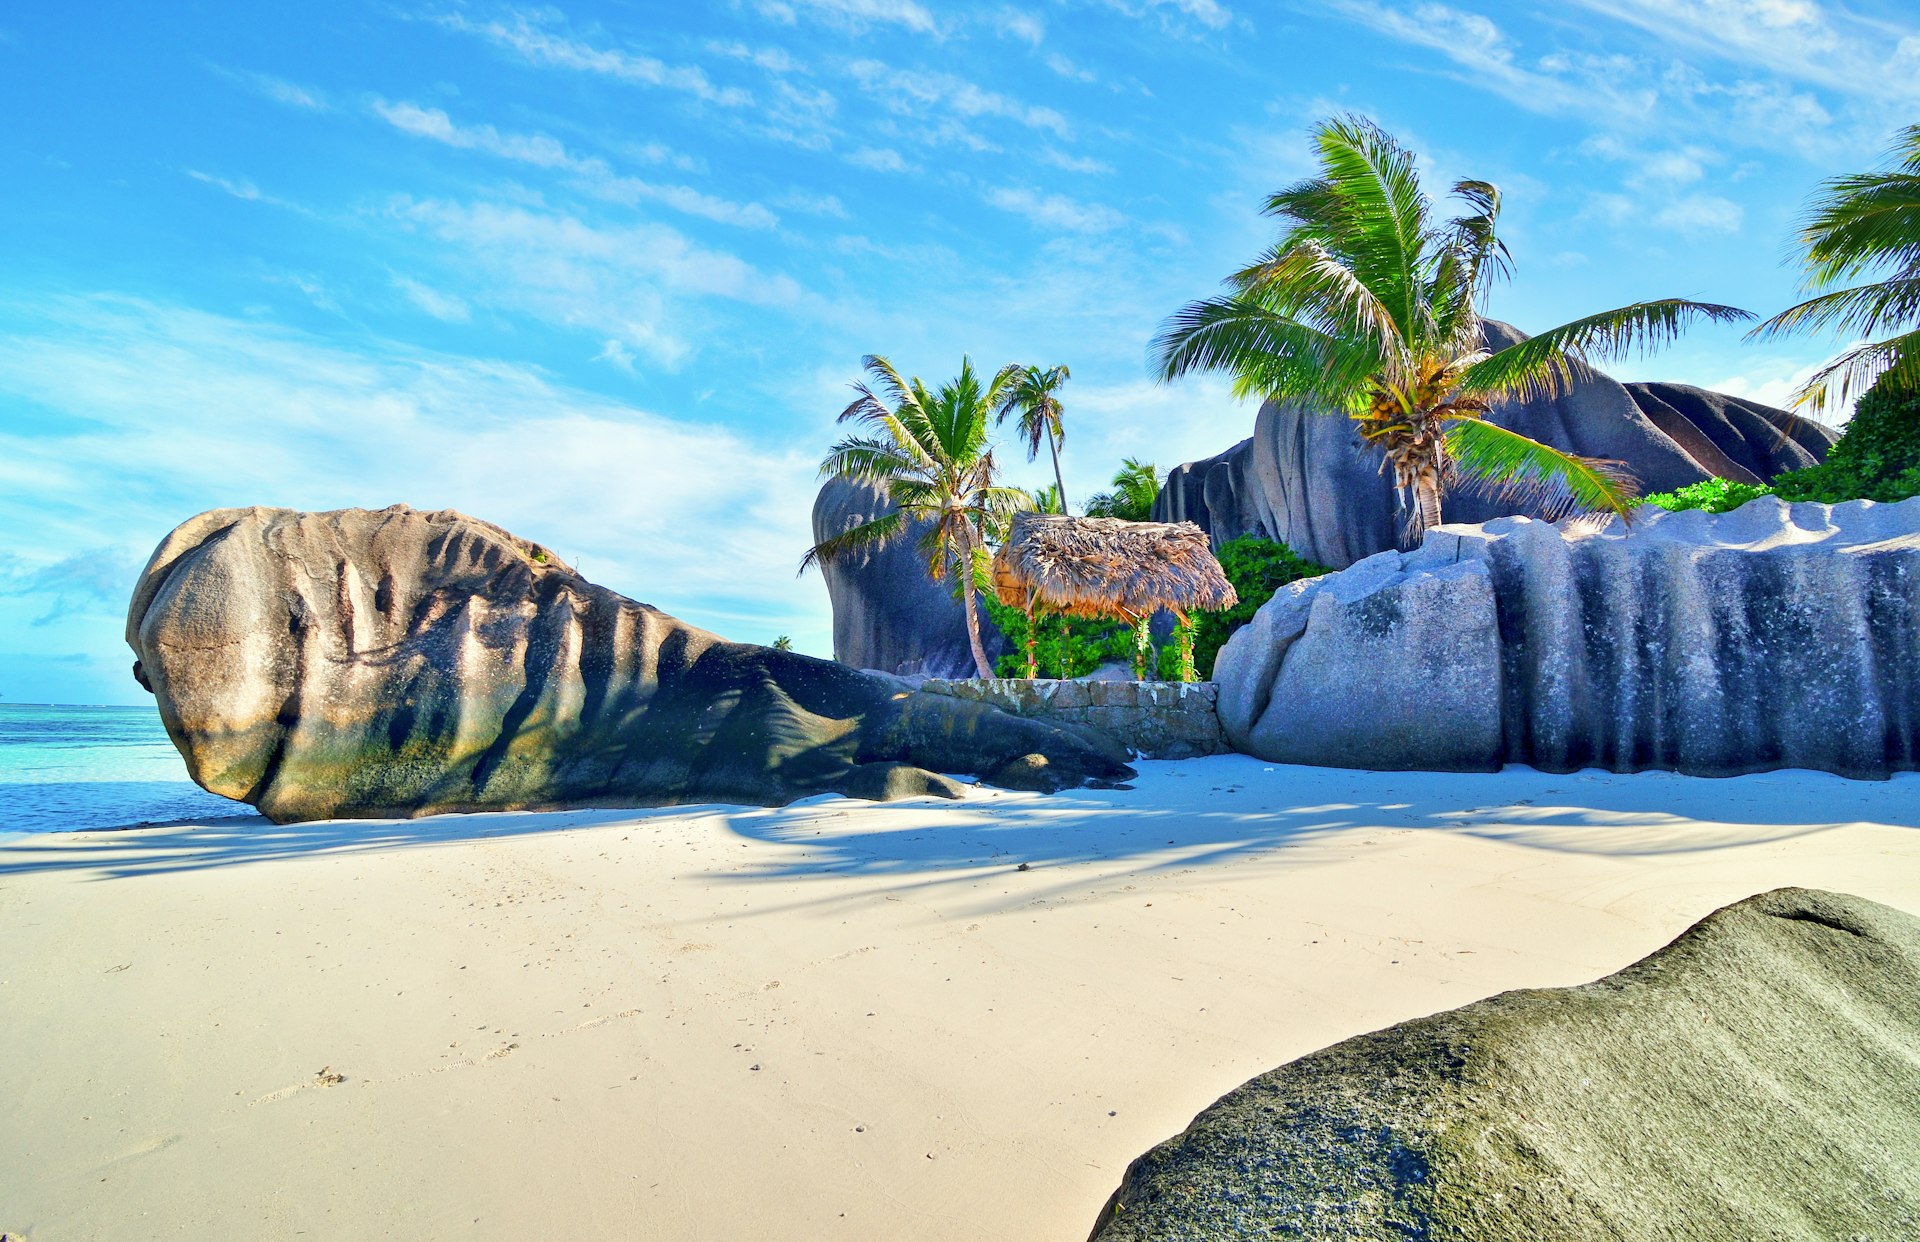 Seychelles is the most beautiful tropical islands of the world's in the Indian Ocean